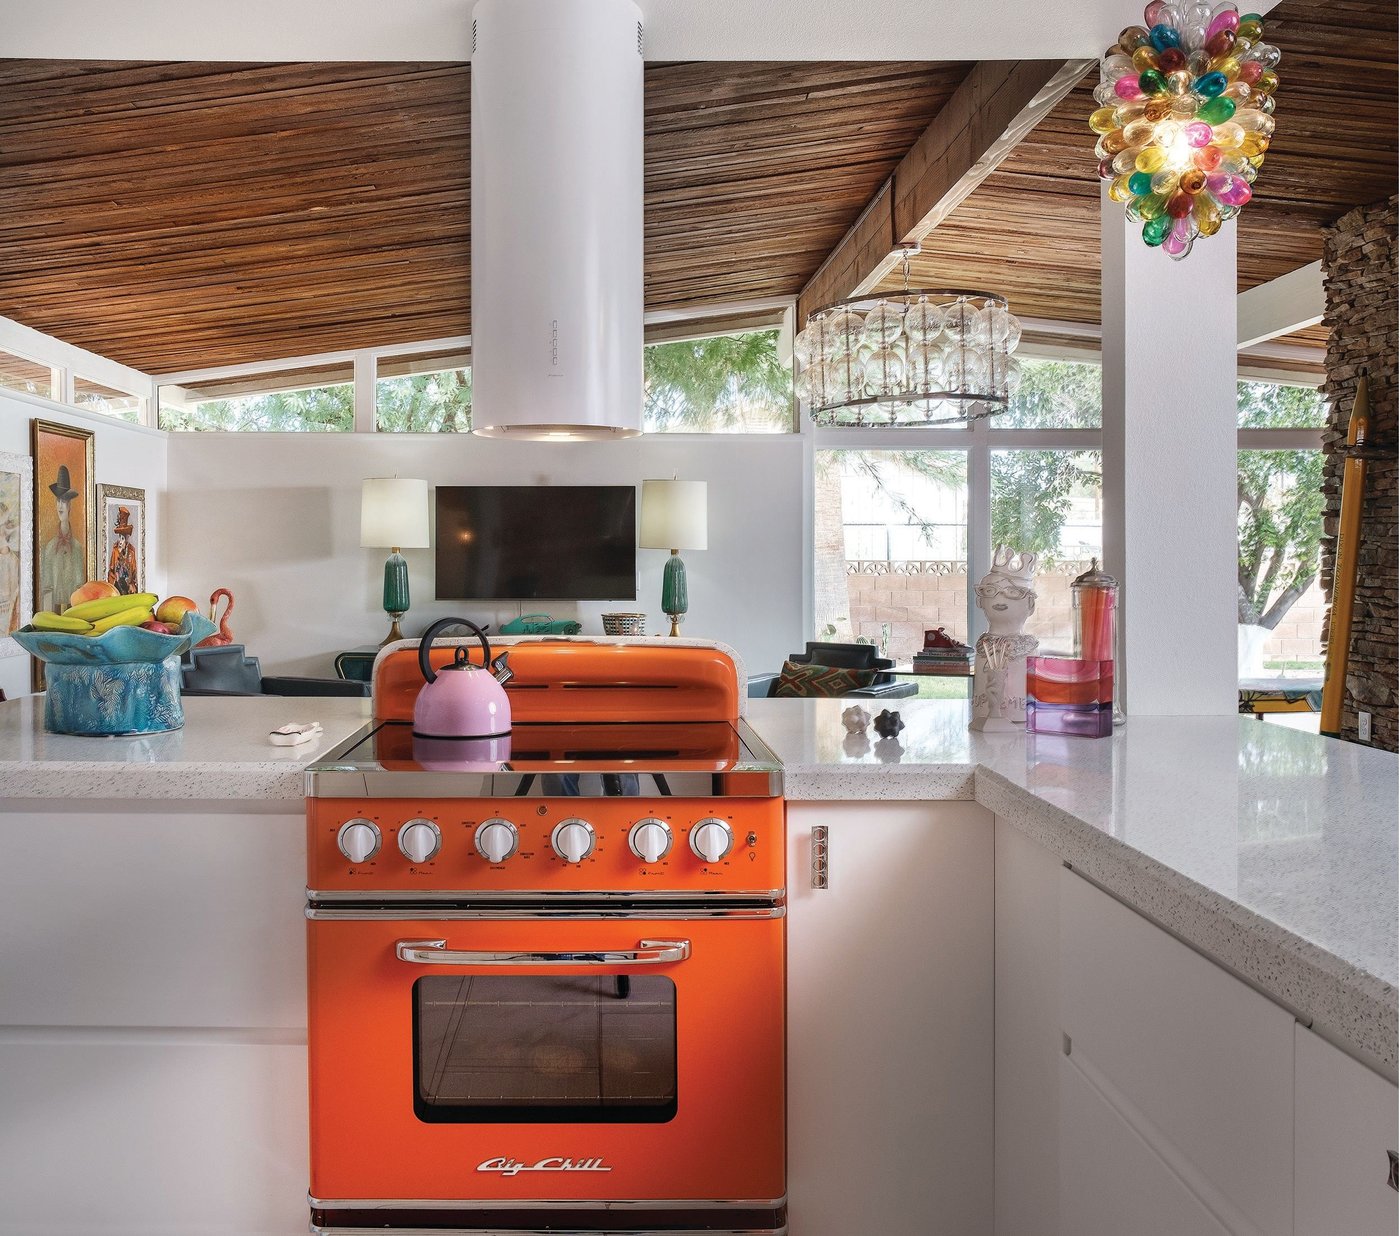 Bold appliances in the kitchen pop against white cabinets Photographed by Michael Woodall